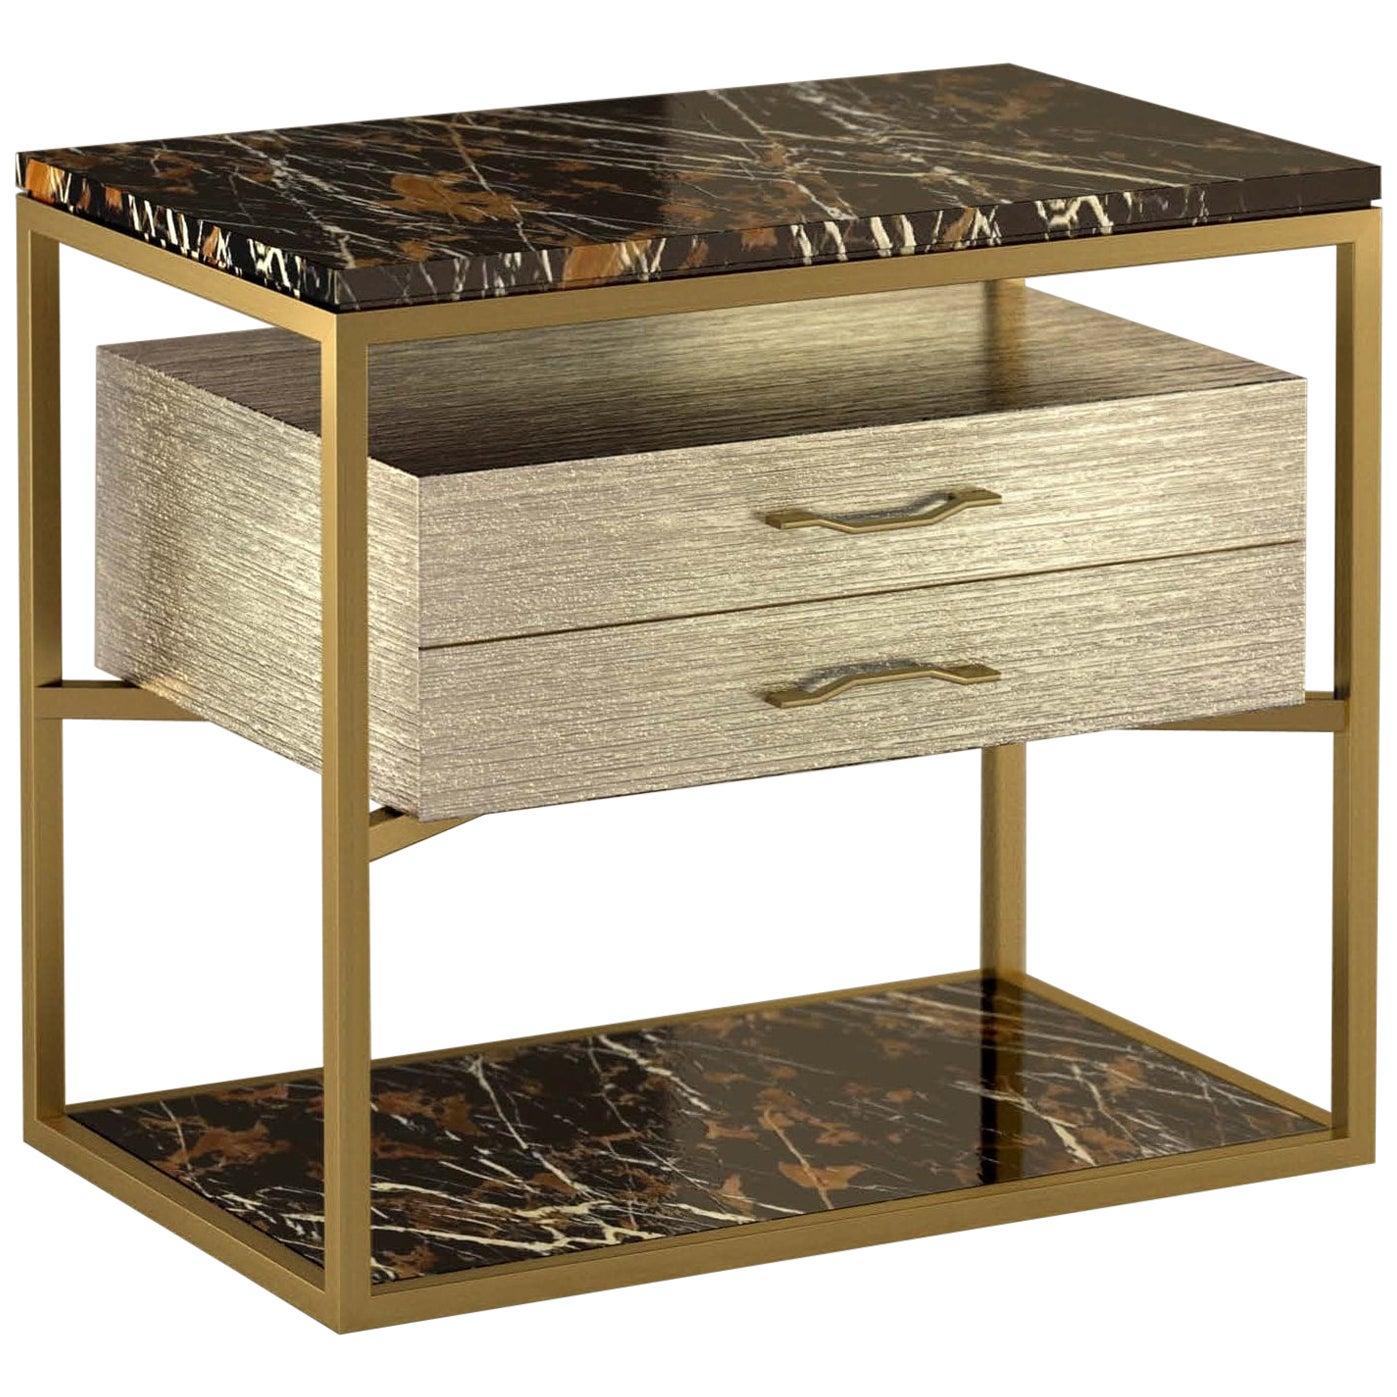 Giovannozzi Home, Bedside Table "Garbo" Black Marble and Metal Brass Finish-Italy